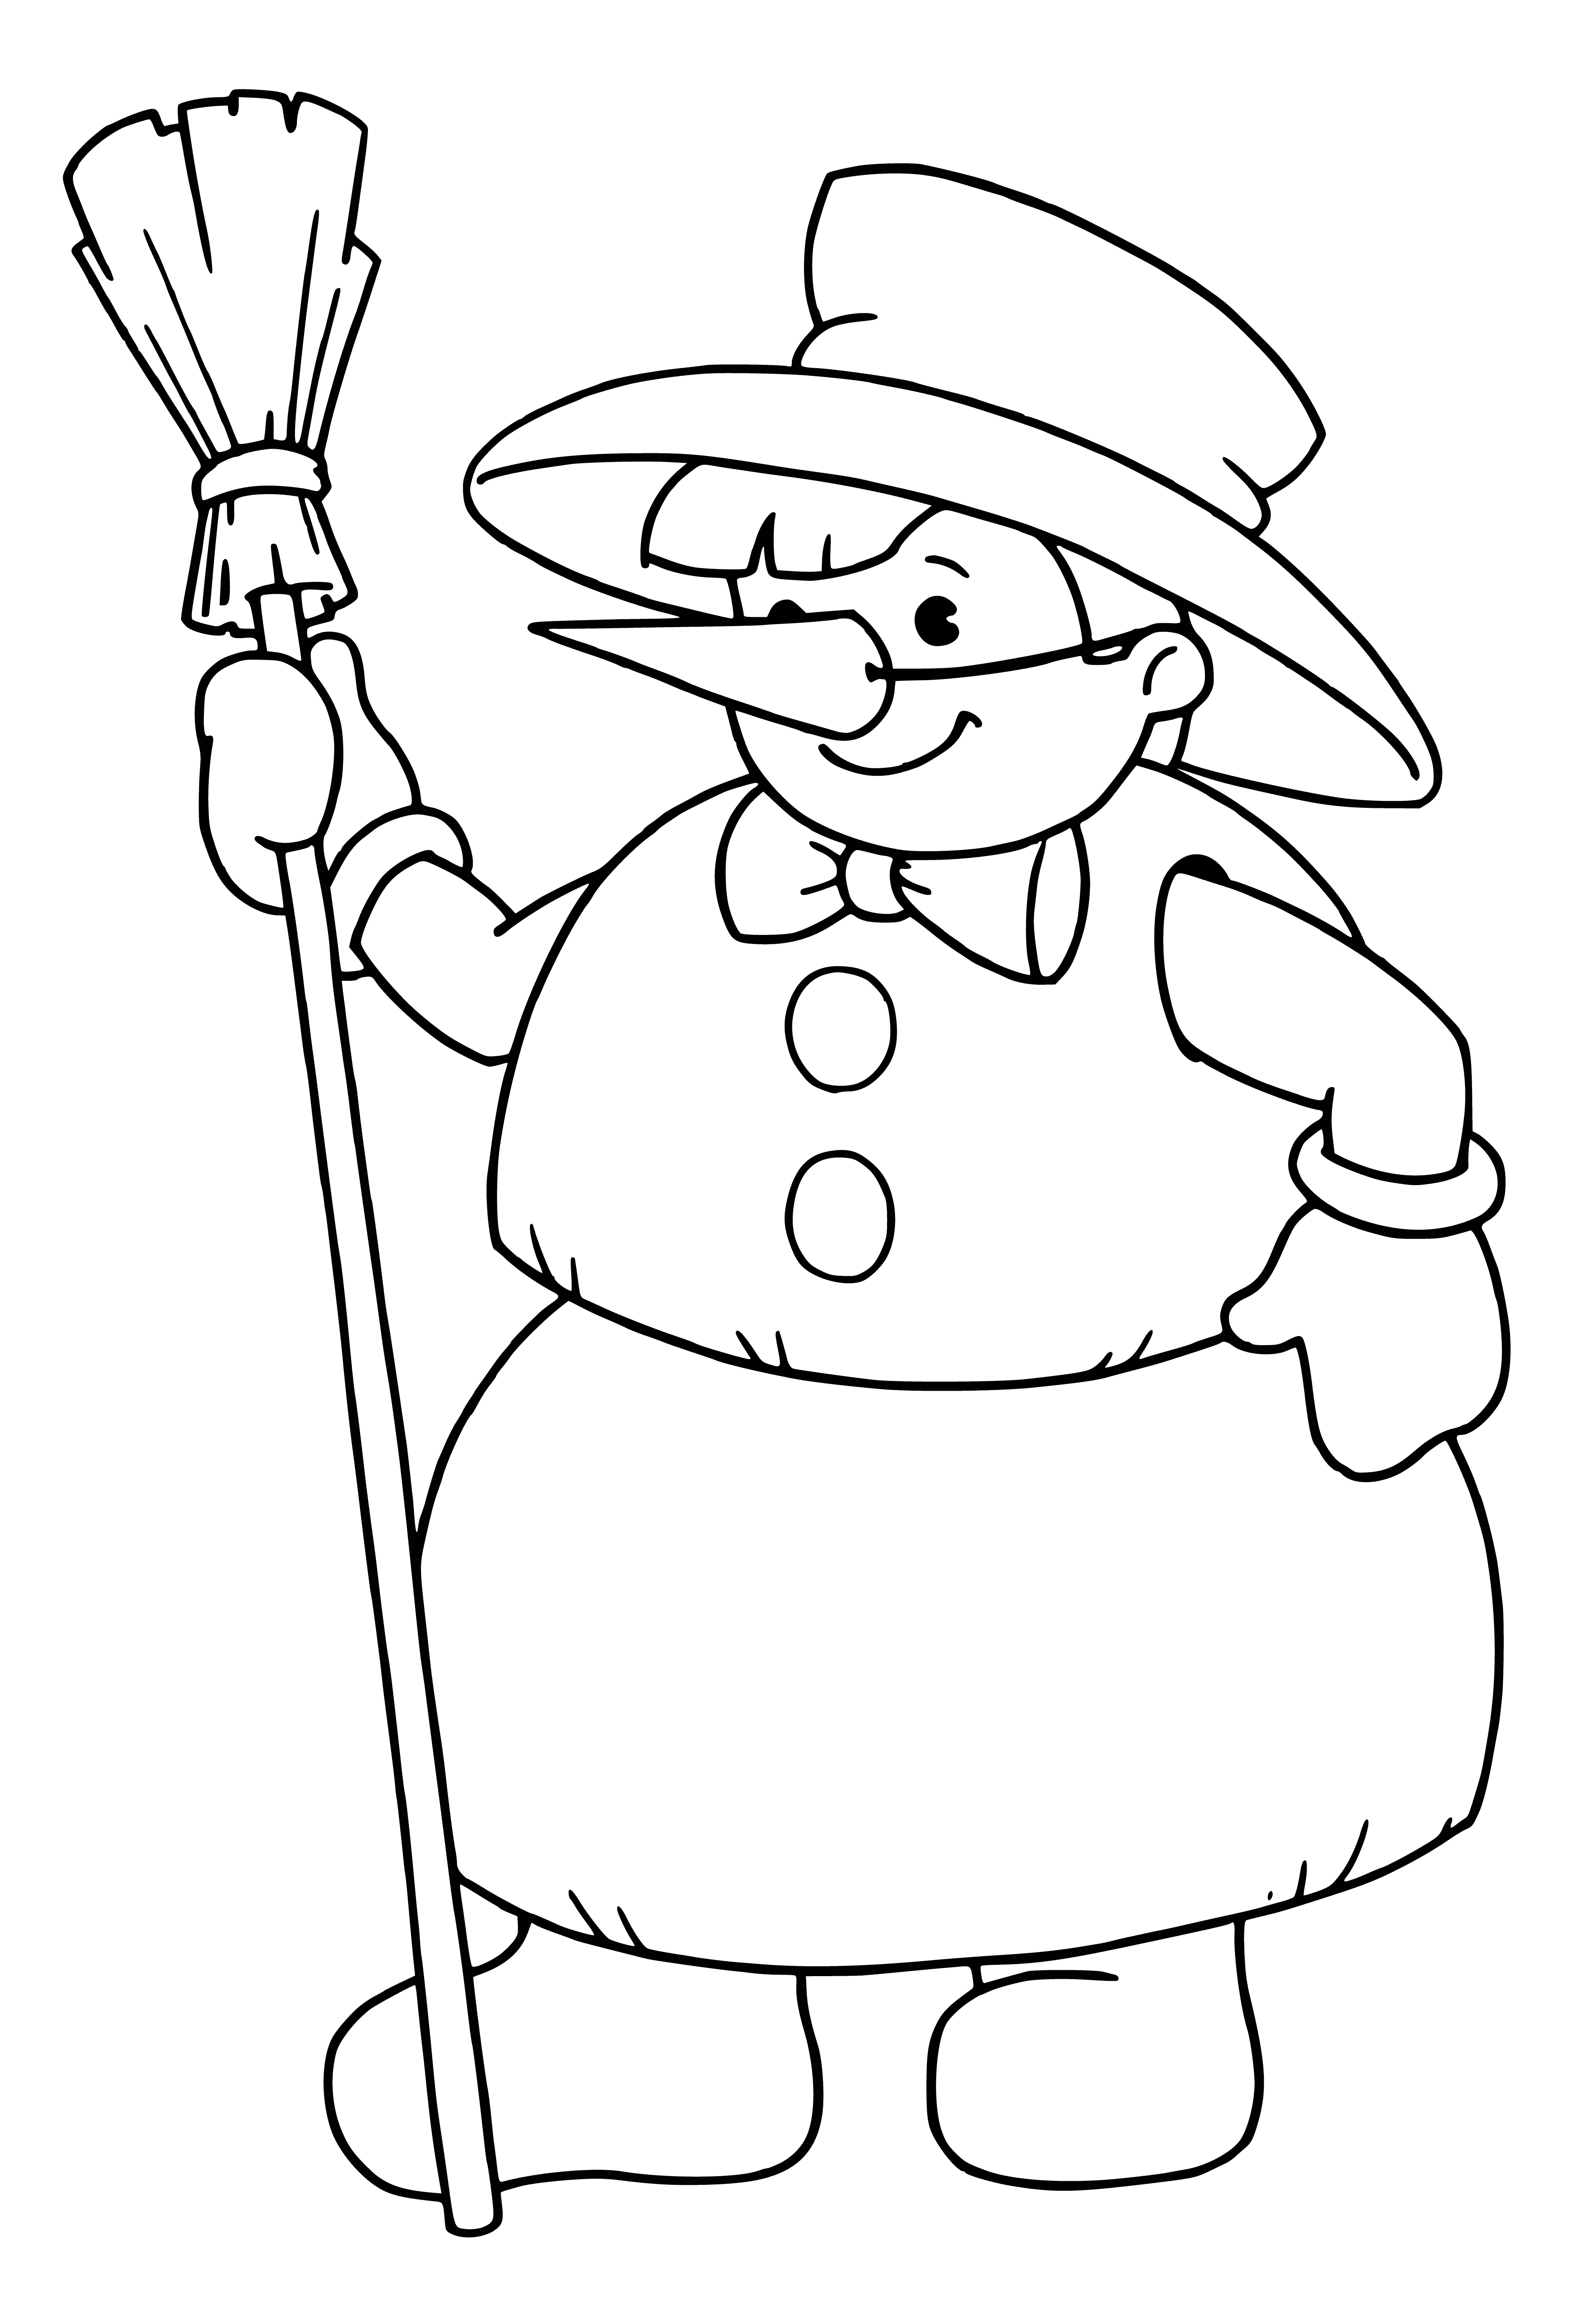 coloring page: A happy child dressed as a snowman for New Year's carnival, with white costume, fluffy white hat & scarf, black buttons & top hat. #cute